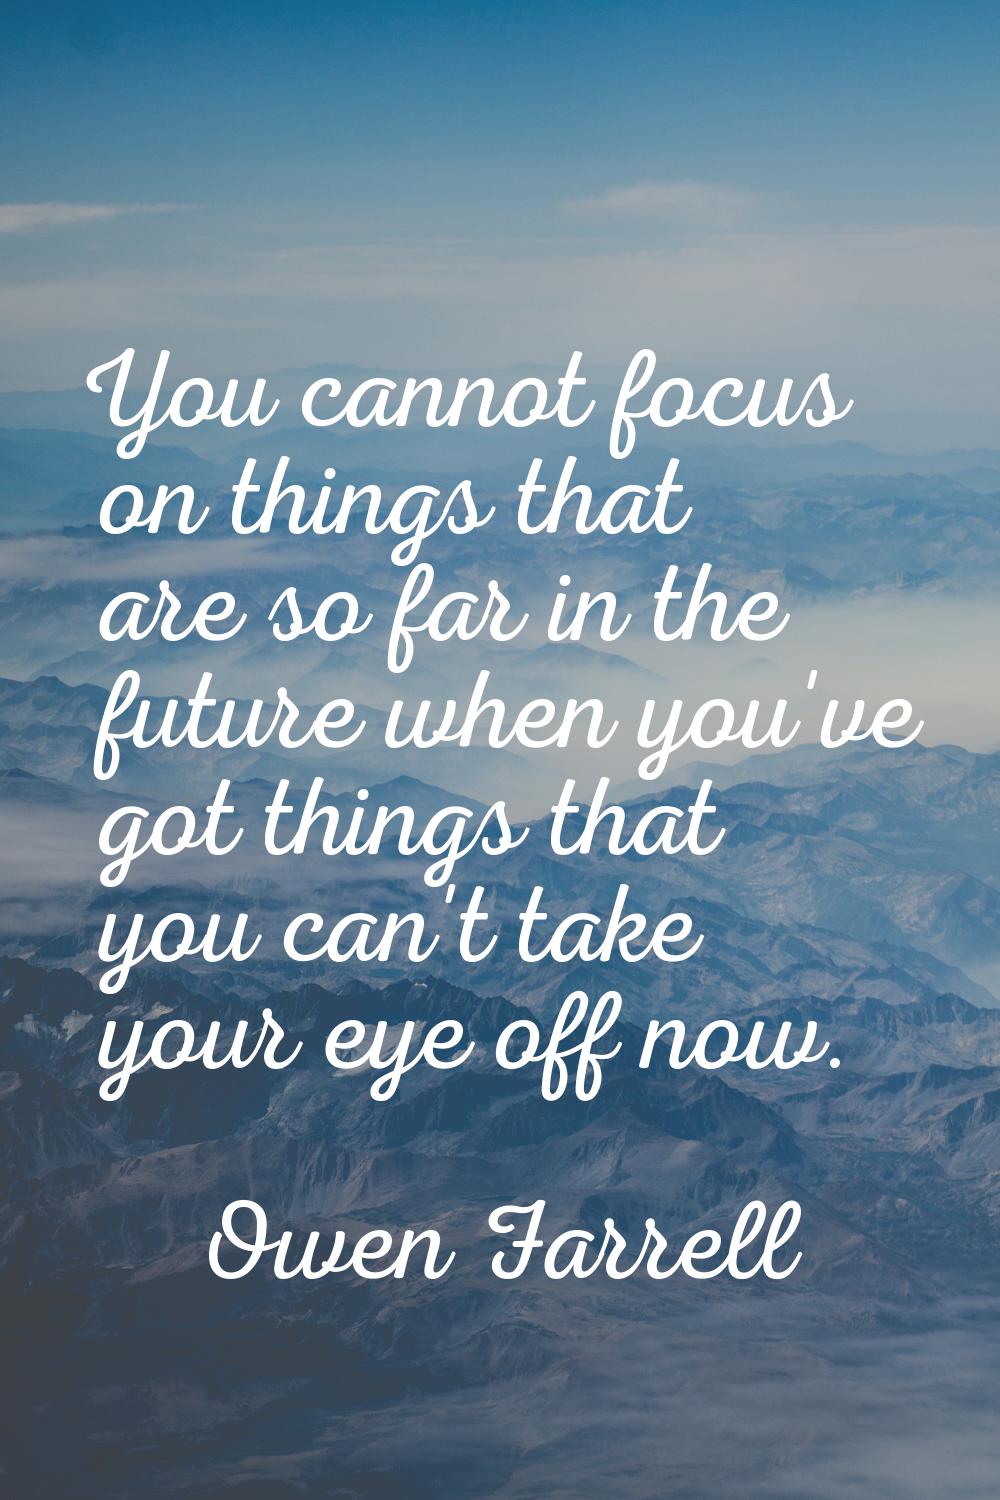 You cannot focus on things that are so far in the future when you've got things that you can't take